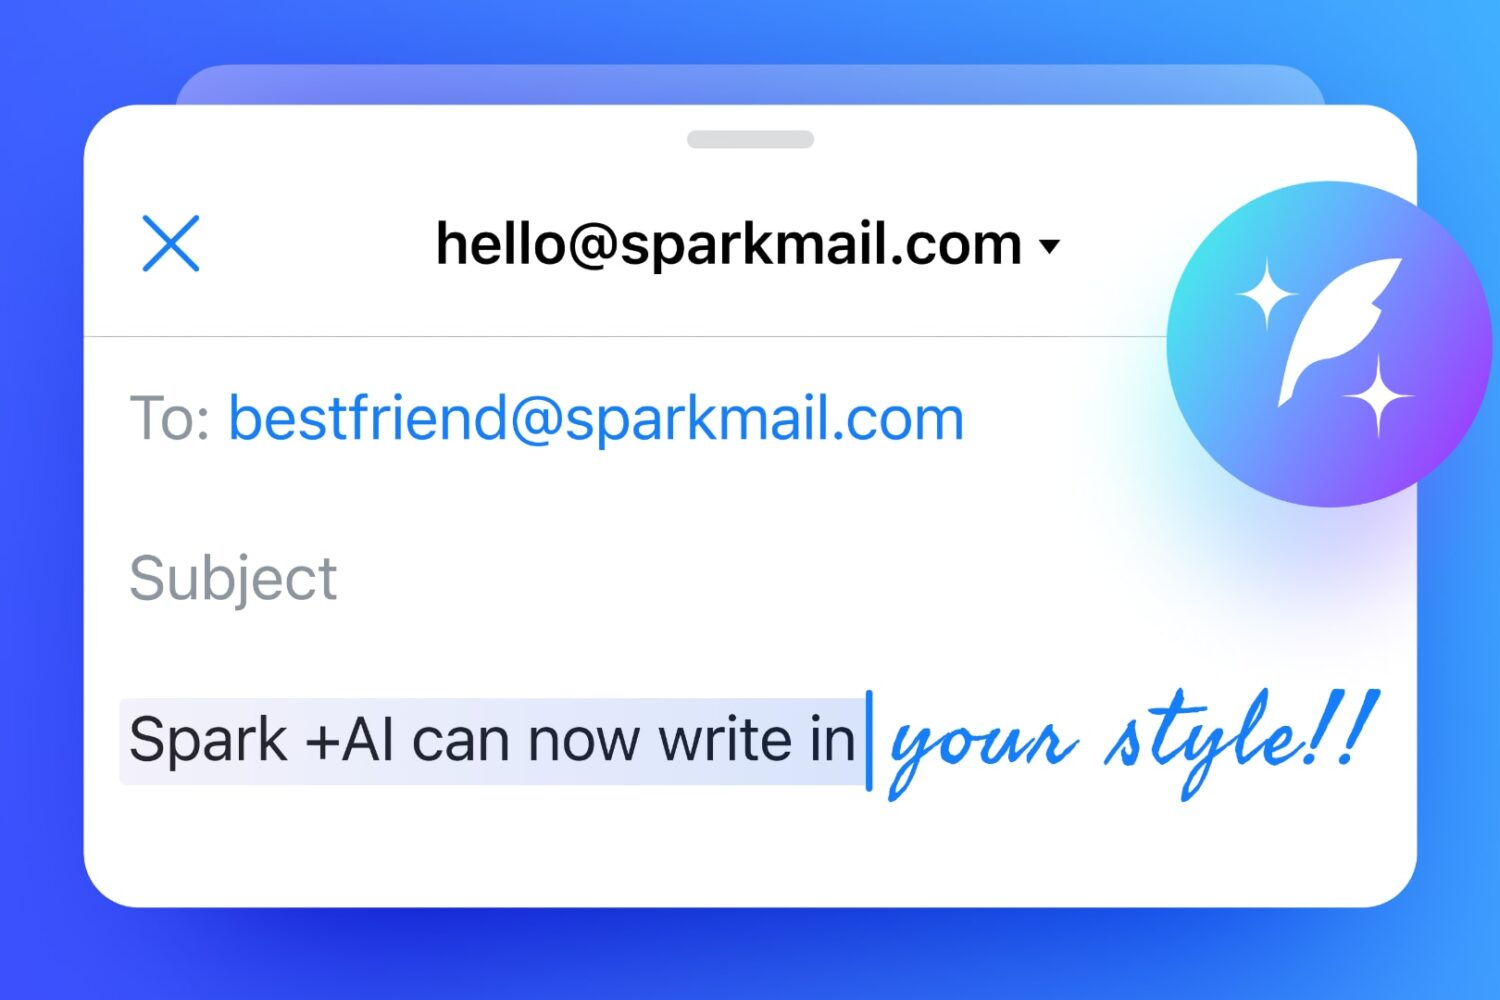 Marketing image promoting the Writing My Style feature in the Spark email client